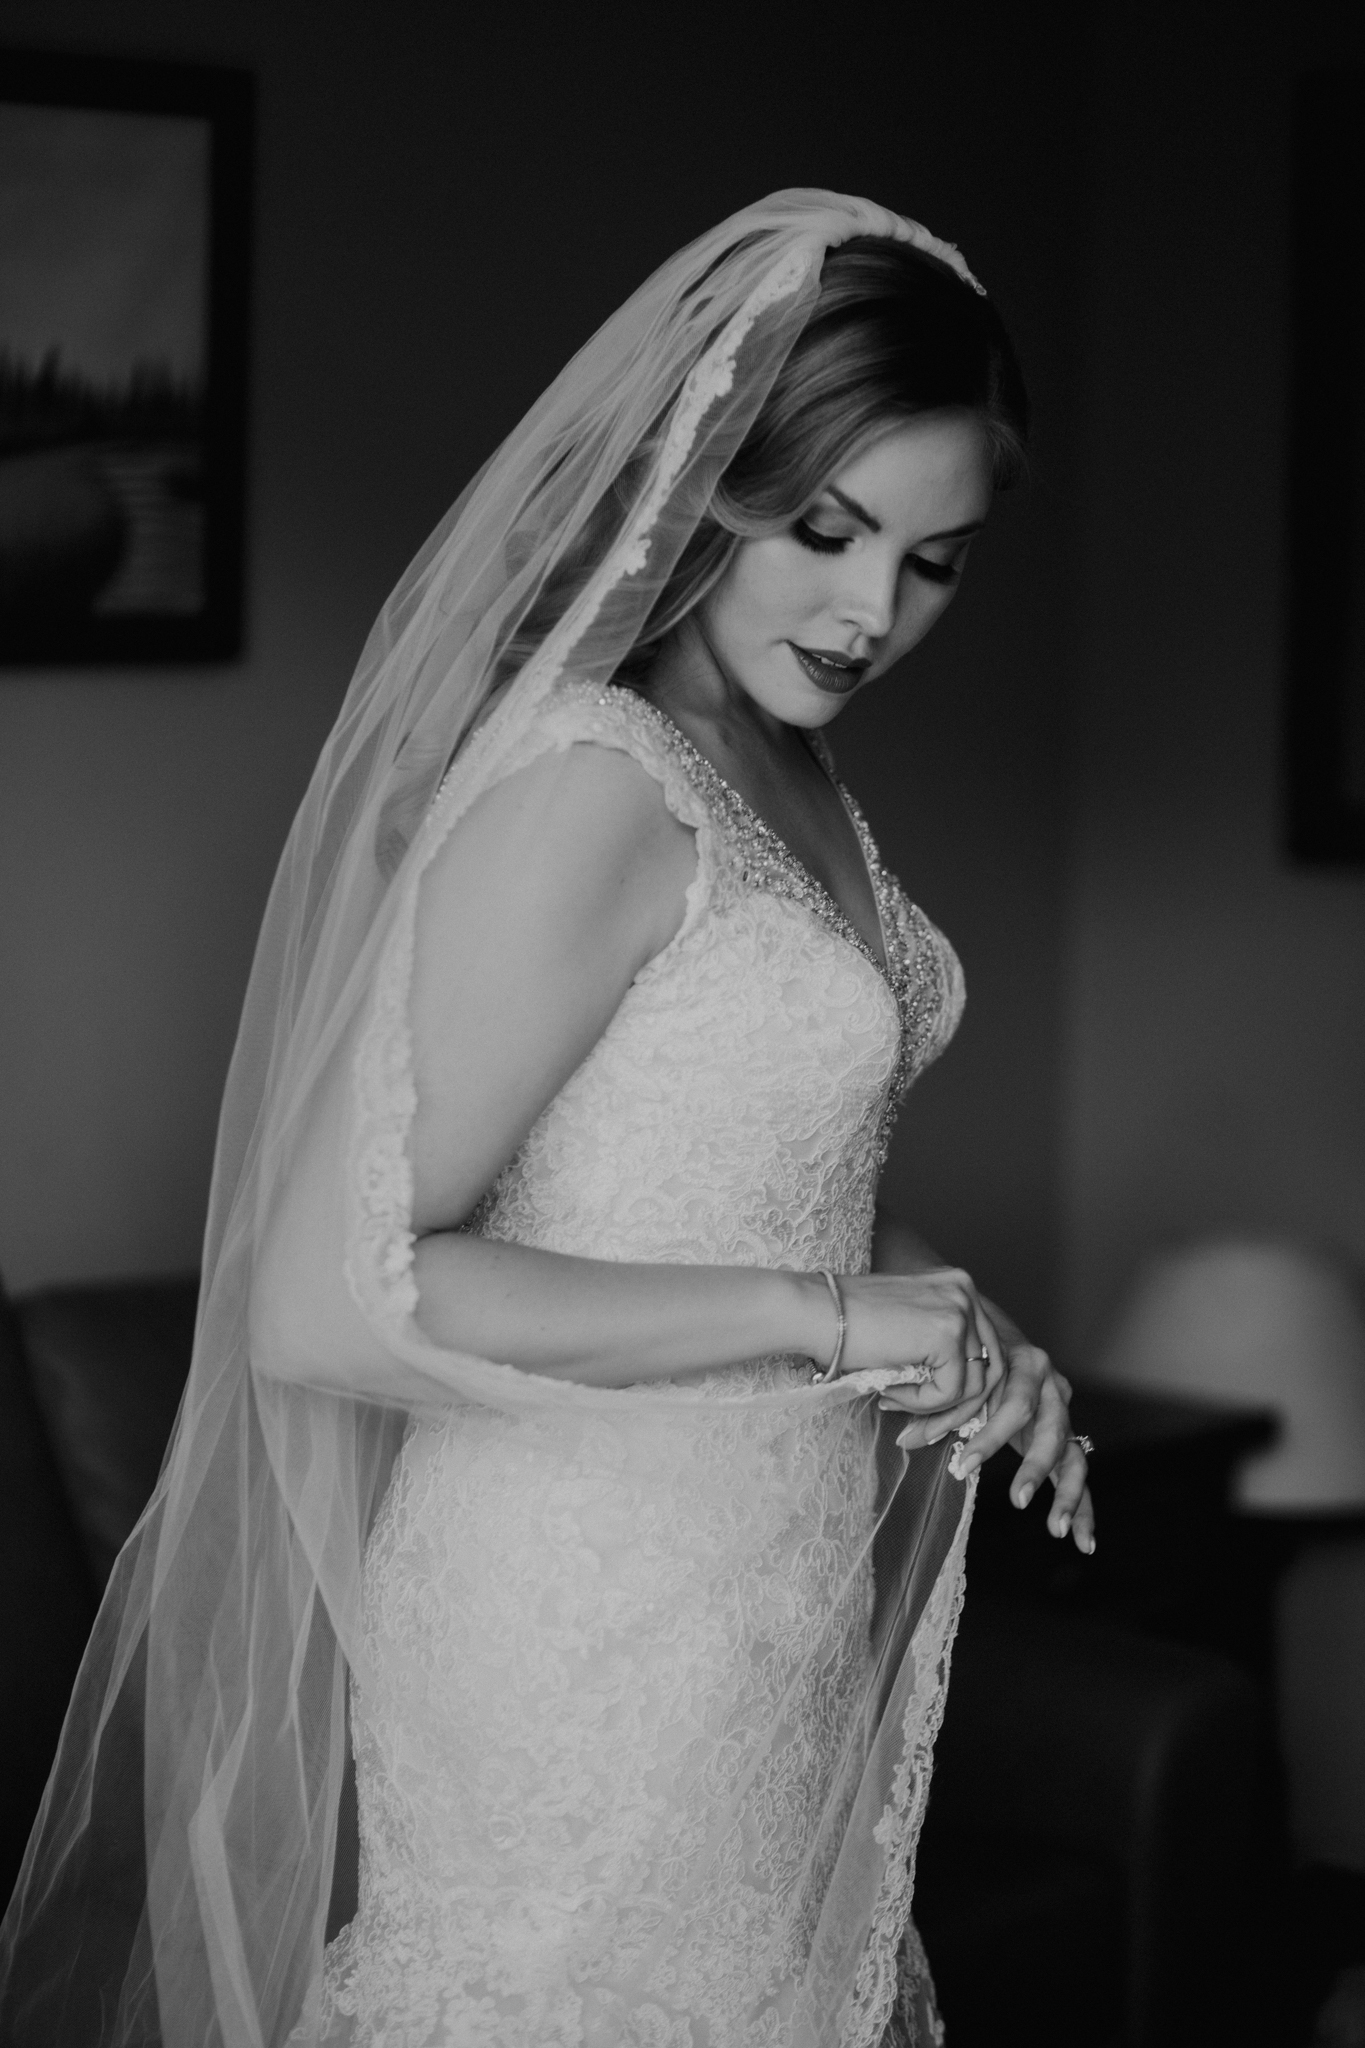 Bride fixing veil candid black and white photograph